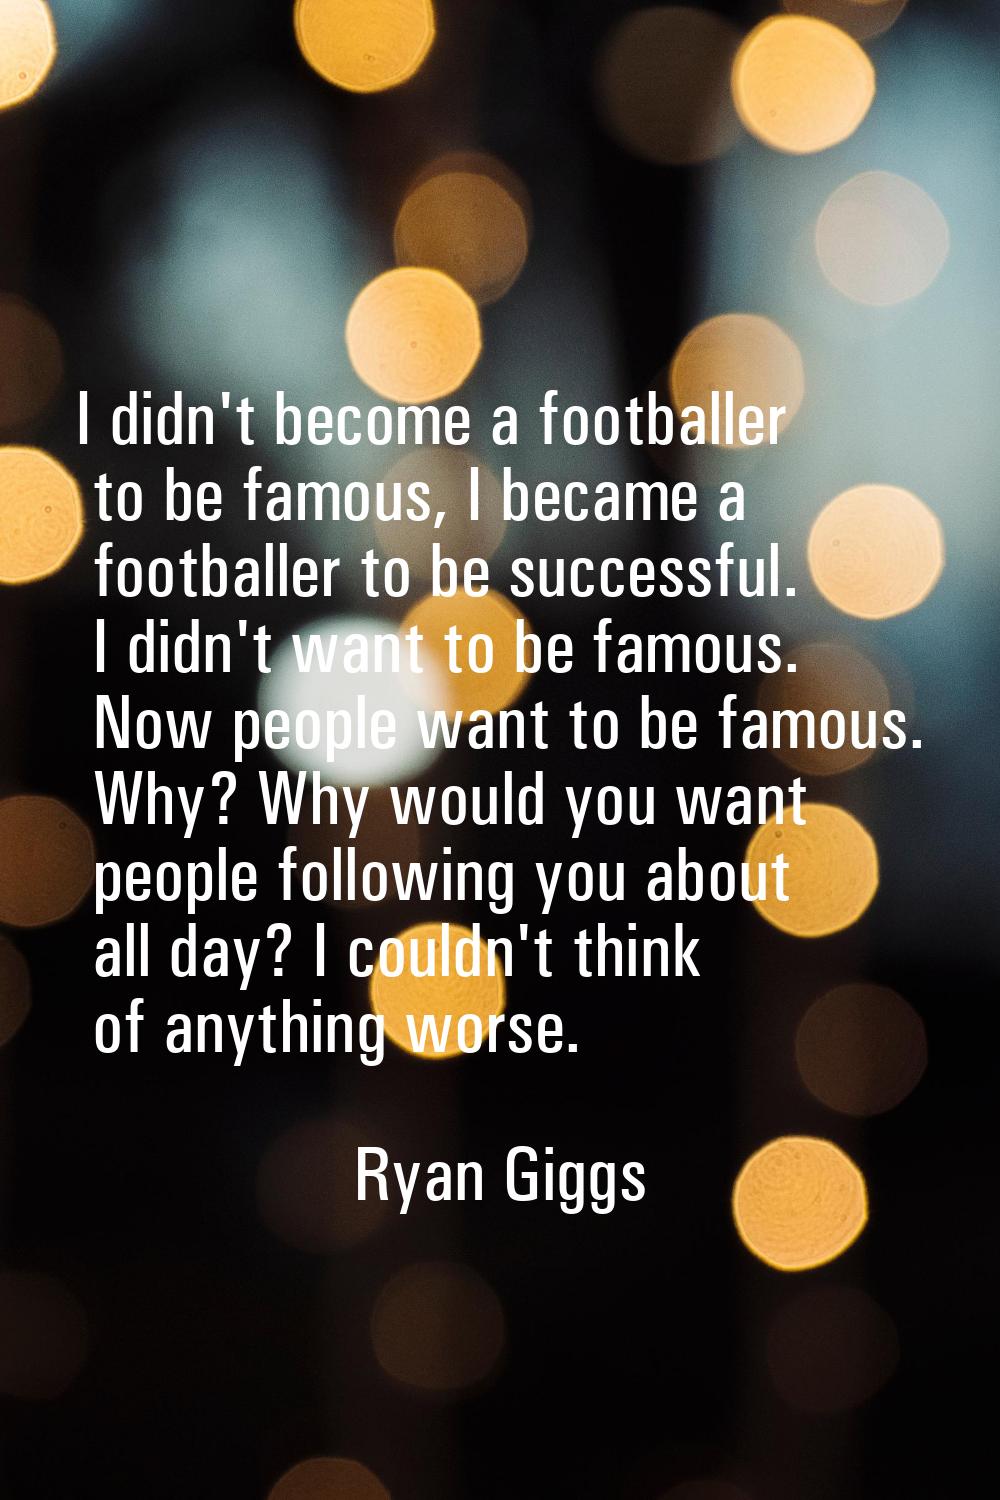 I didn't become a footballer to be famous, I became a footballer to be successful. I didn't want to